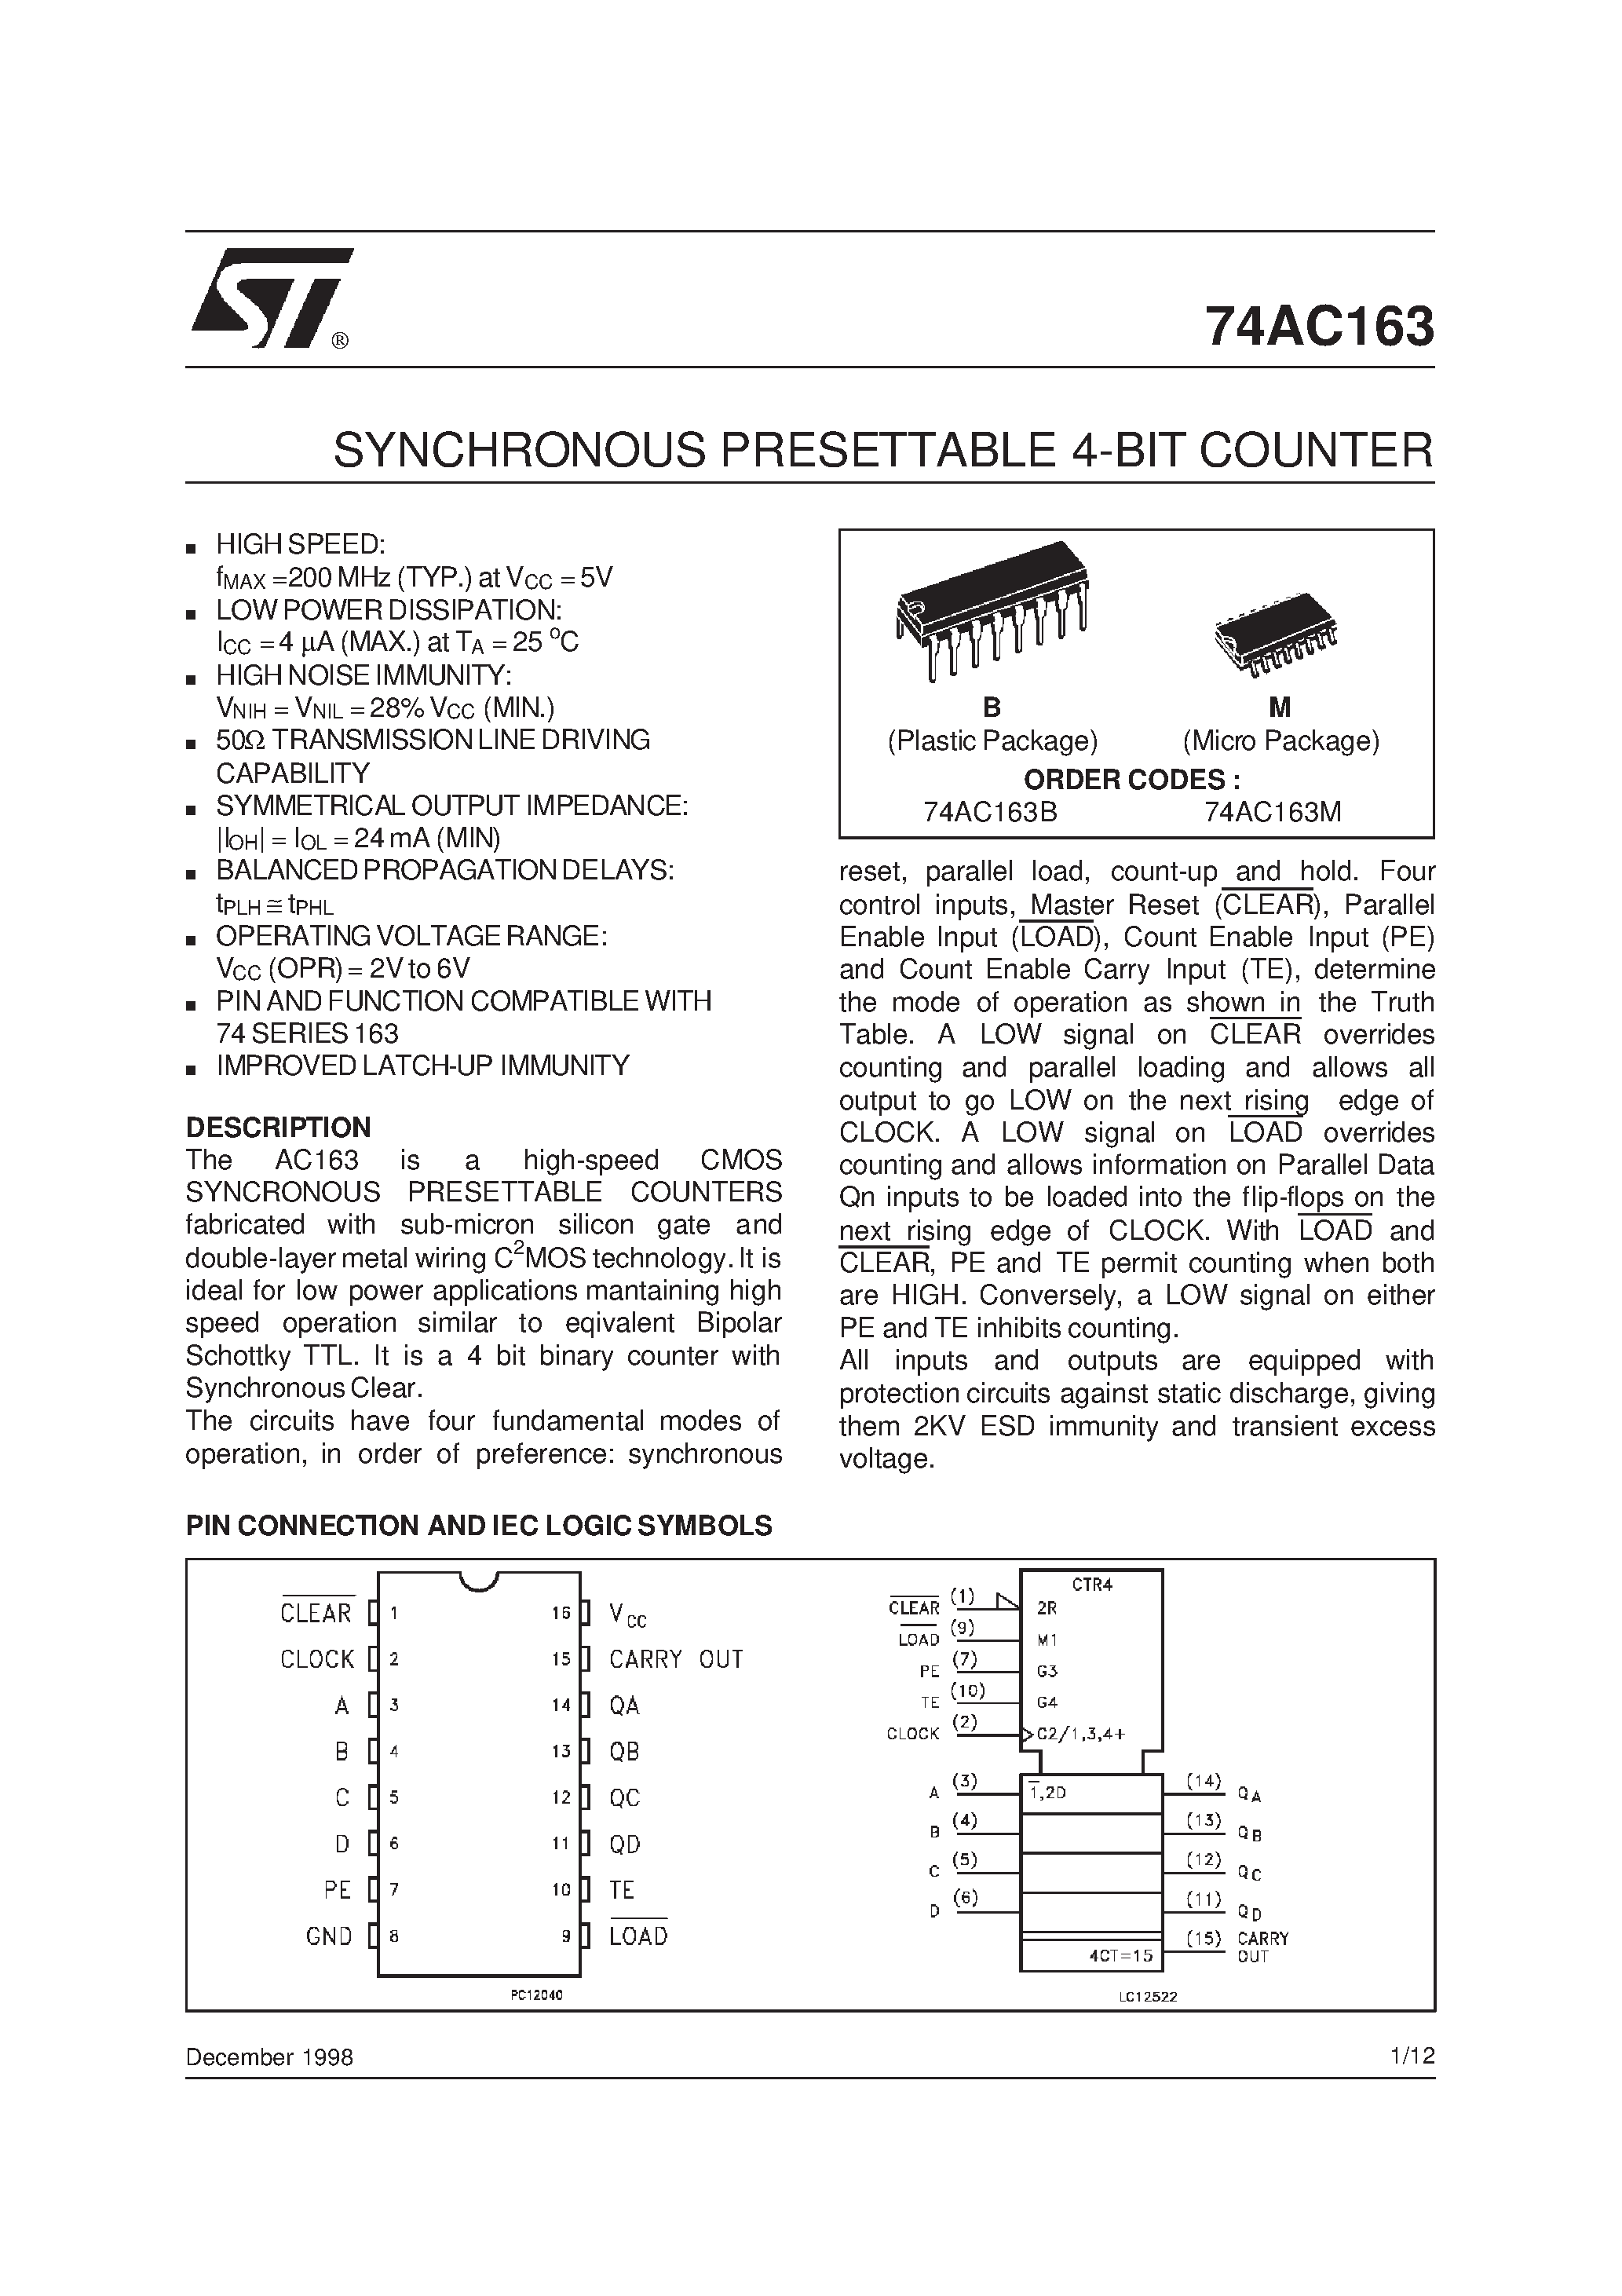 Datasheet 74AC163 - Synchronous Presettable Binary Counter page 1